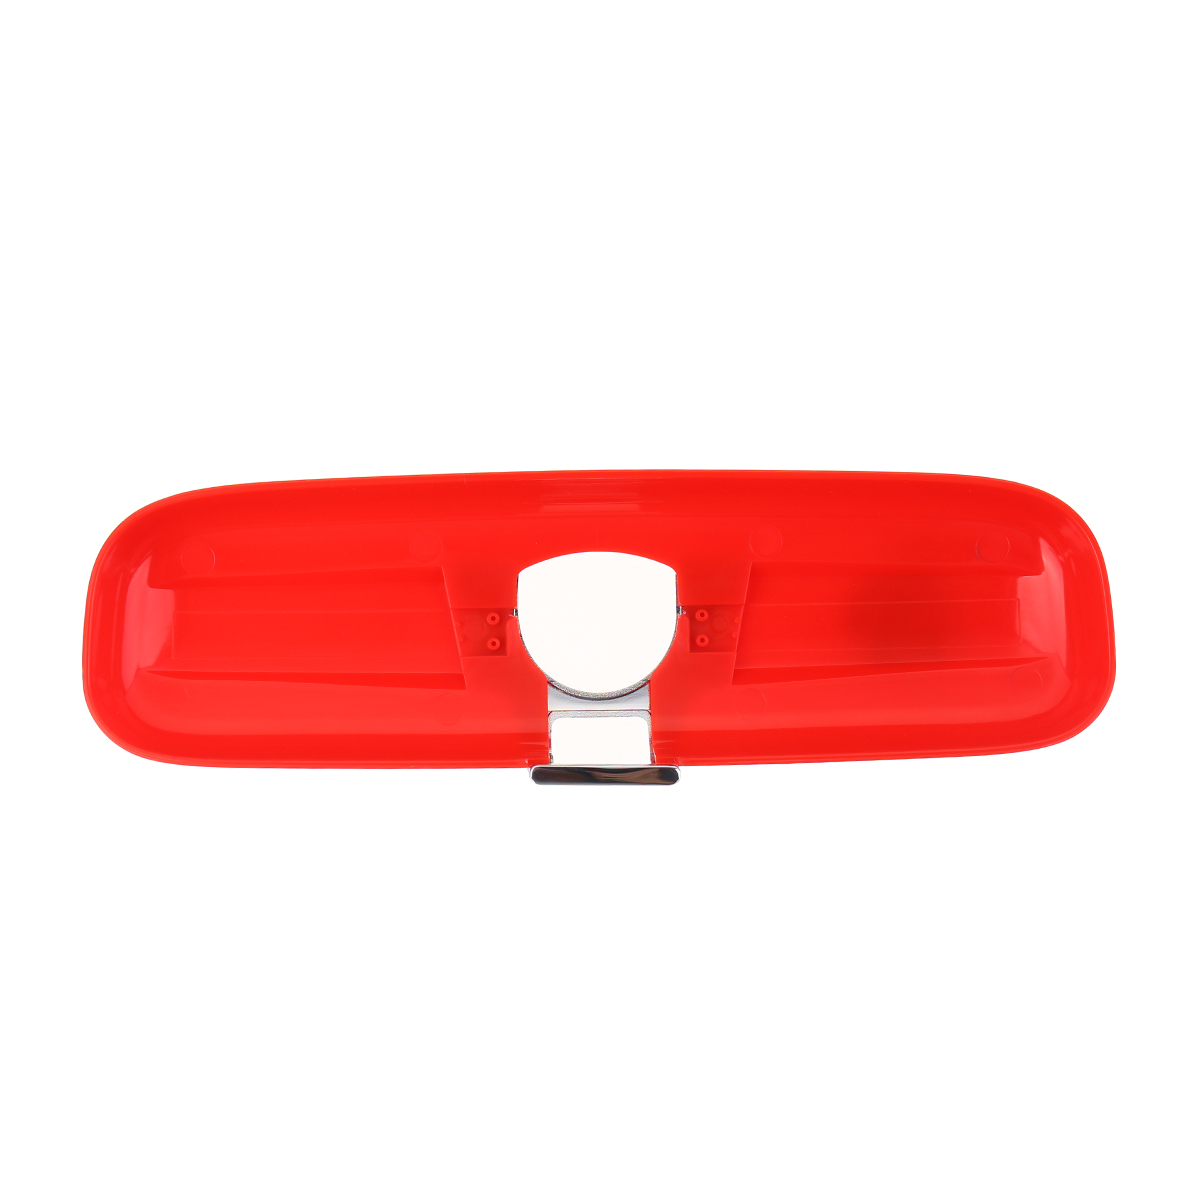 Carbon Fiber Look Interior Rearview Mirror Cover Red for HONDA CIVIC CRV